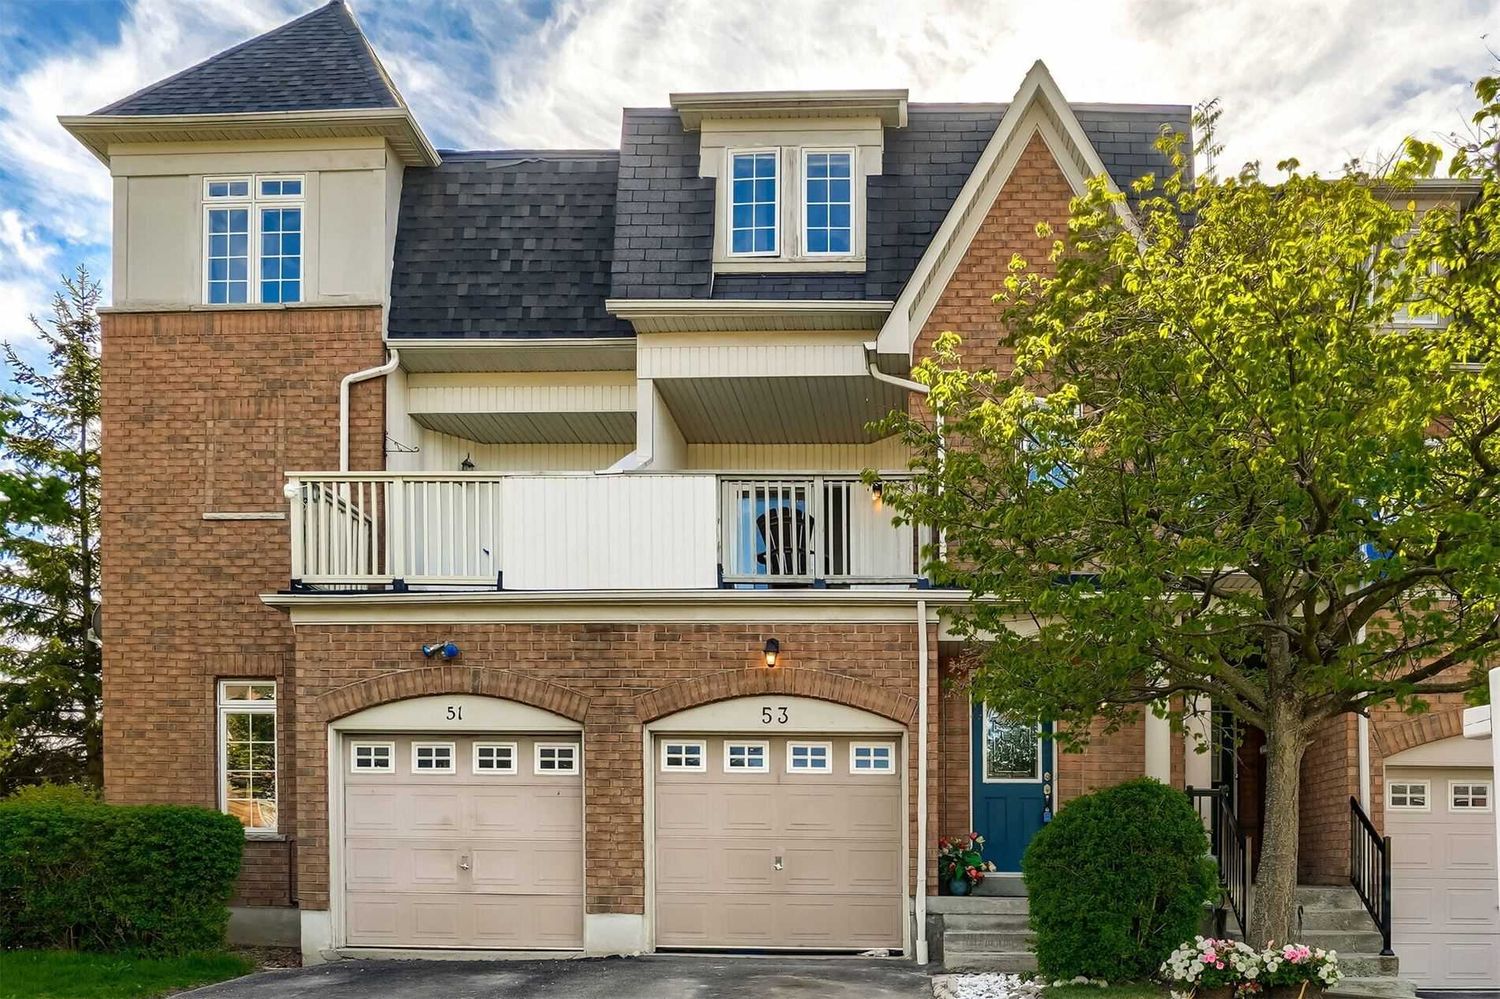 1-118 Sprucedale Way. Sprucedale & Palisades Townhomes is located in  Whitby, Toronto - image #1 of 2